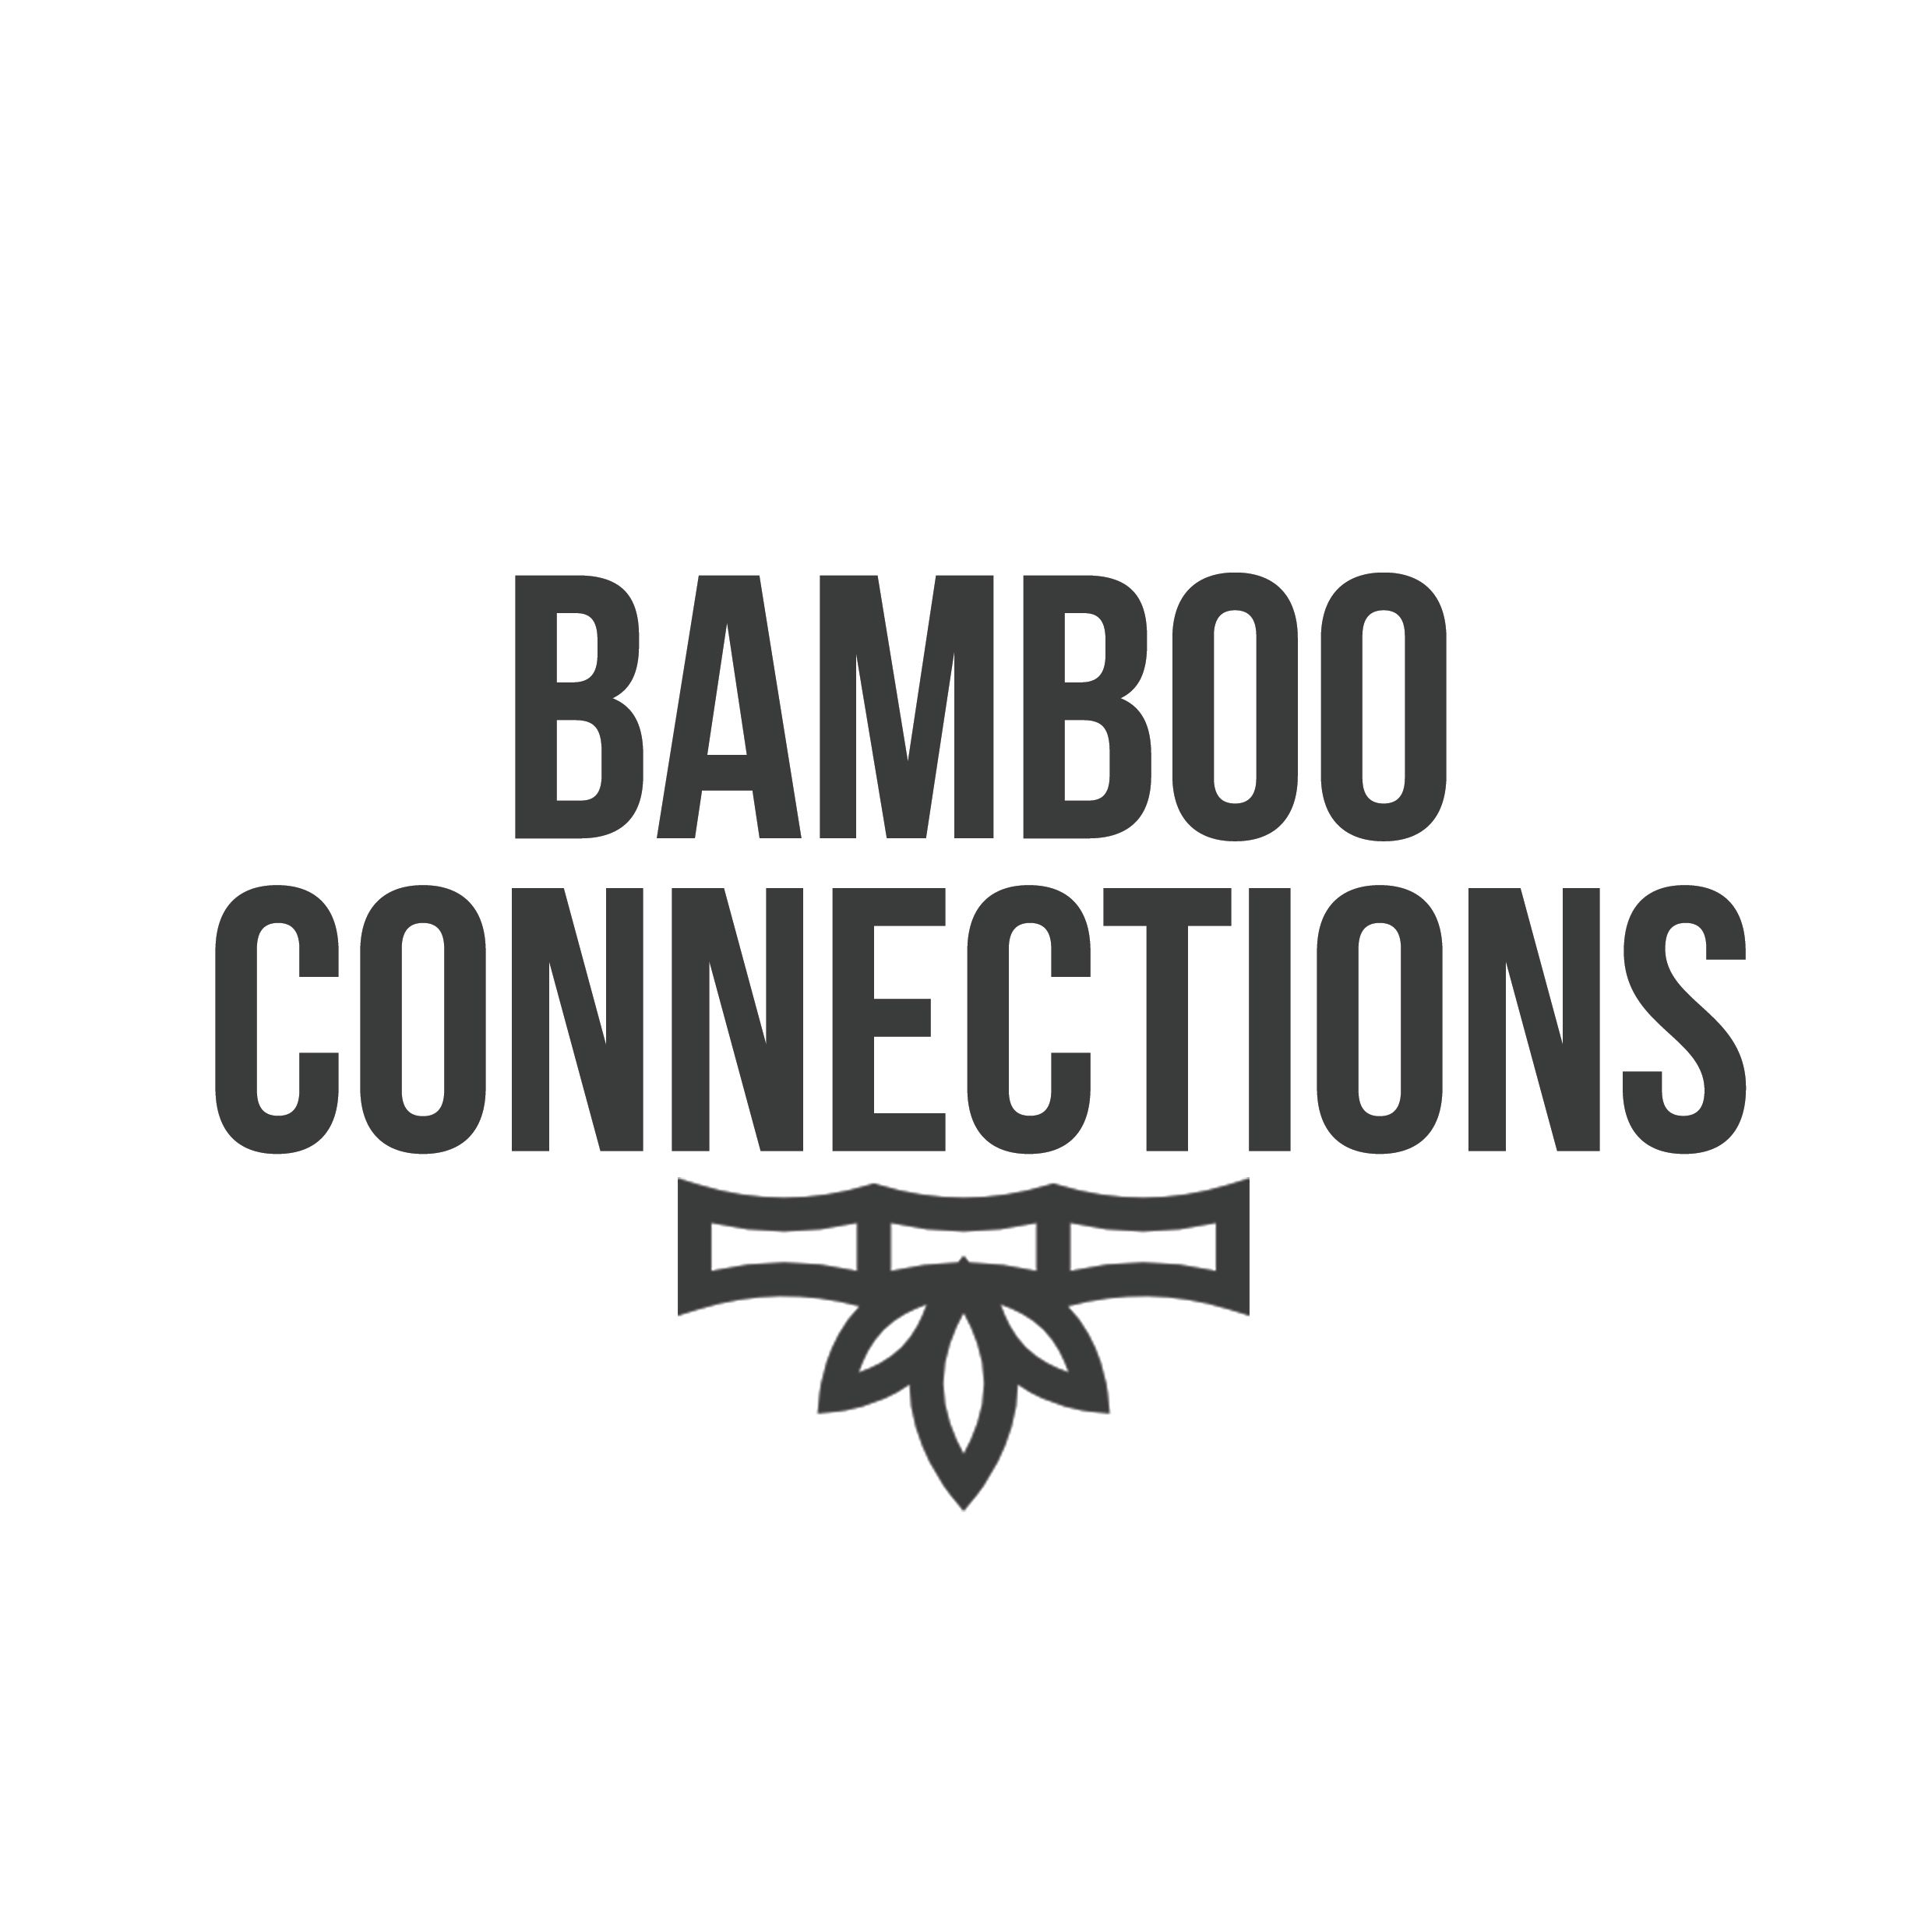 Bamboo Connections Ltd